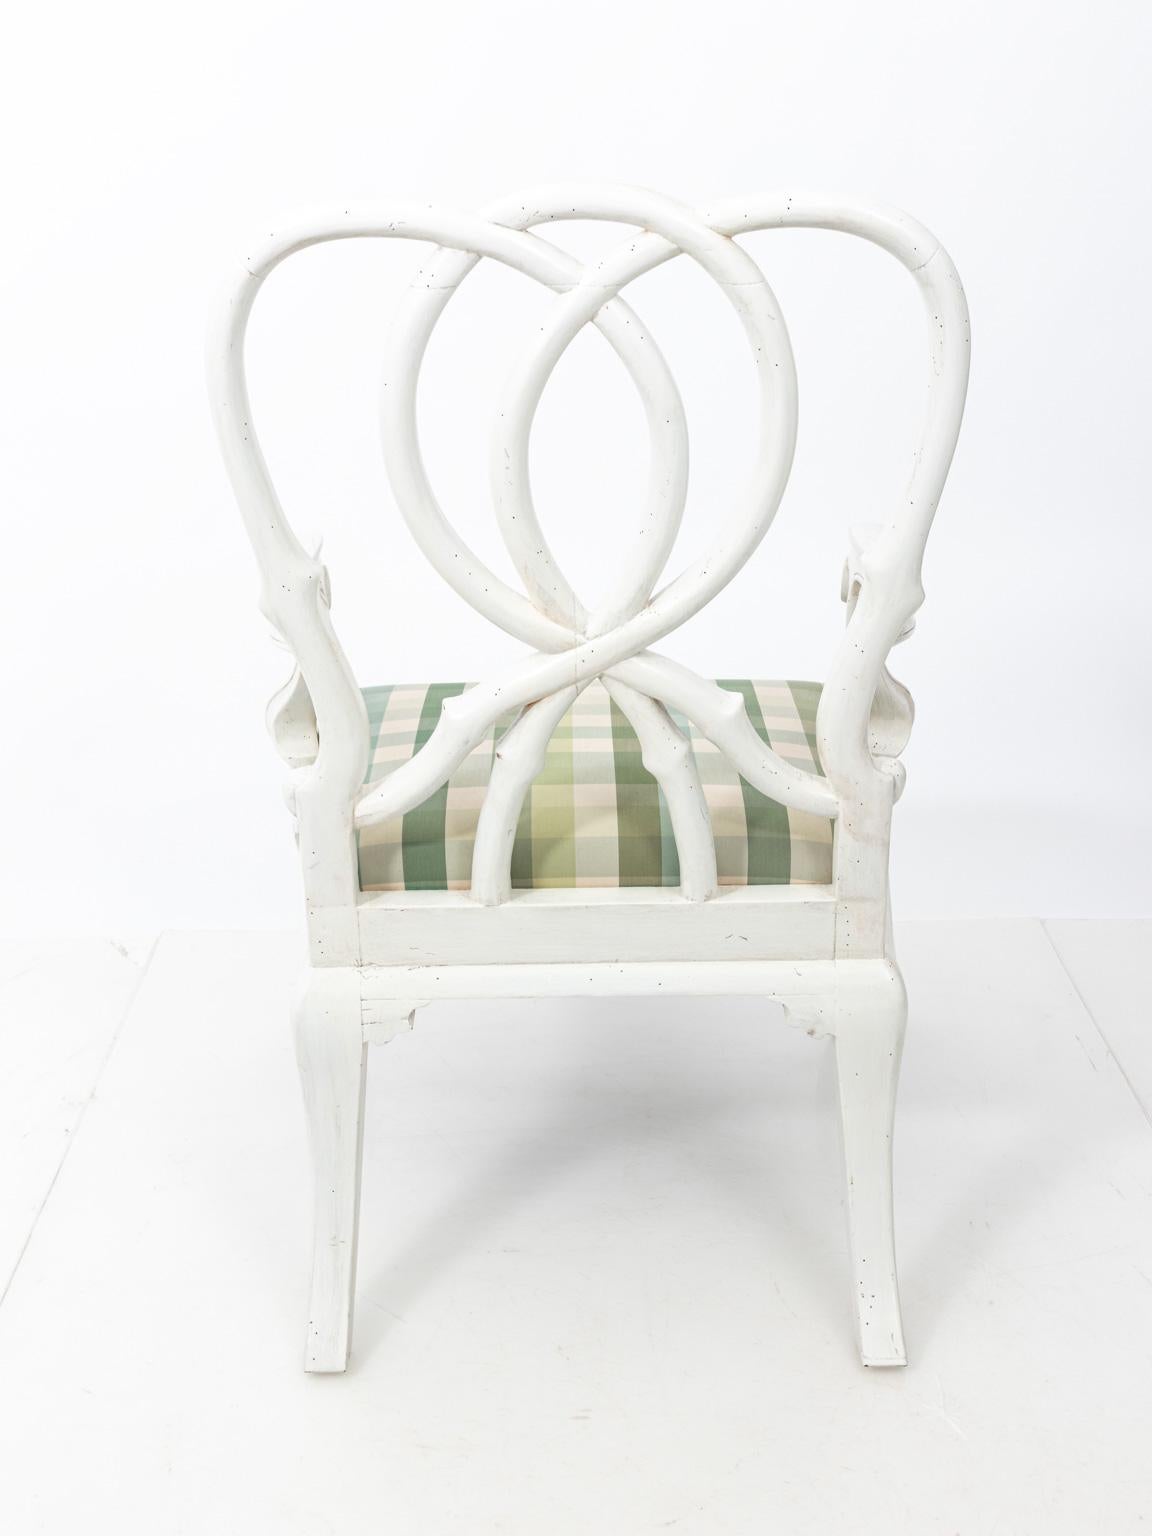 White painted Italian armchair with upholstered seat and cabriole legs. Please note of wear consistent with age including minor paint loss and chips due to use.